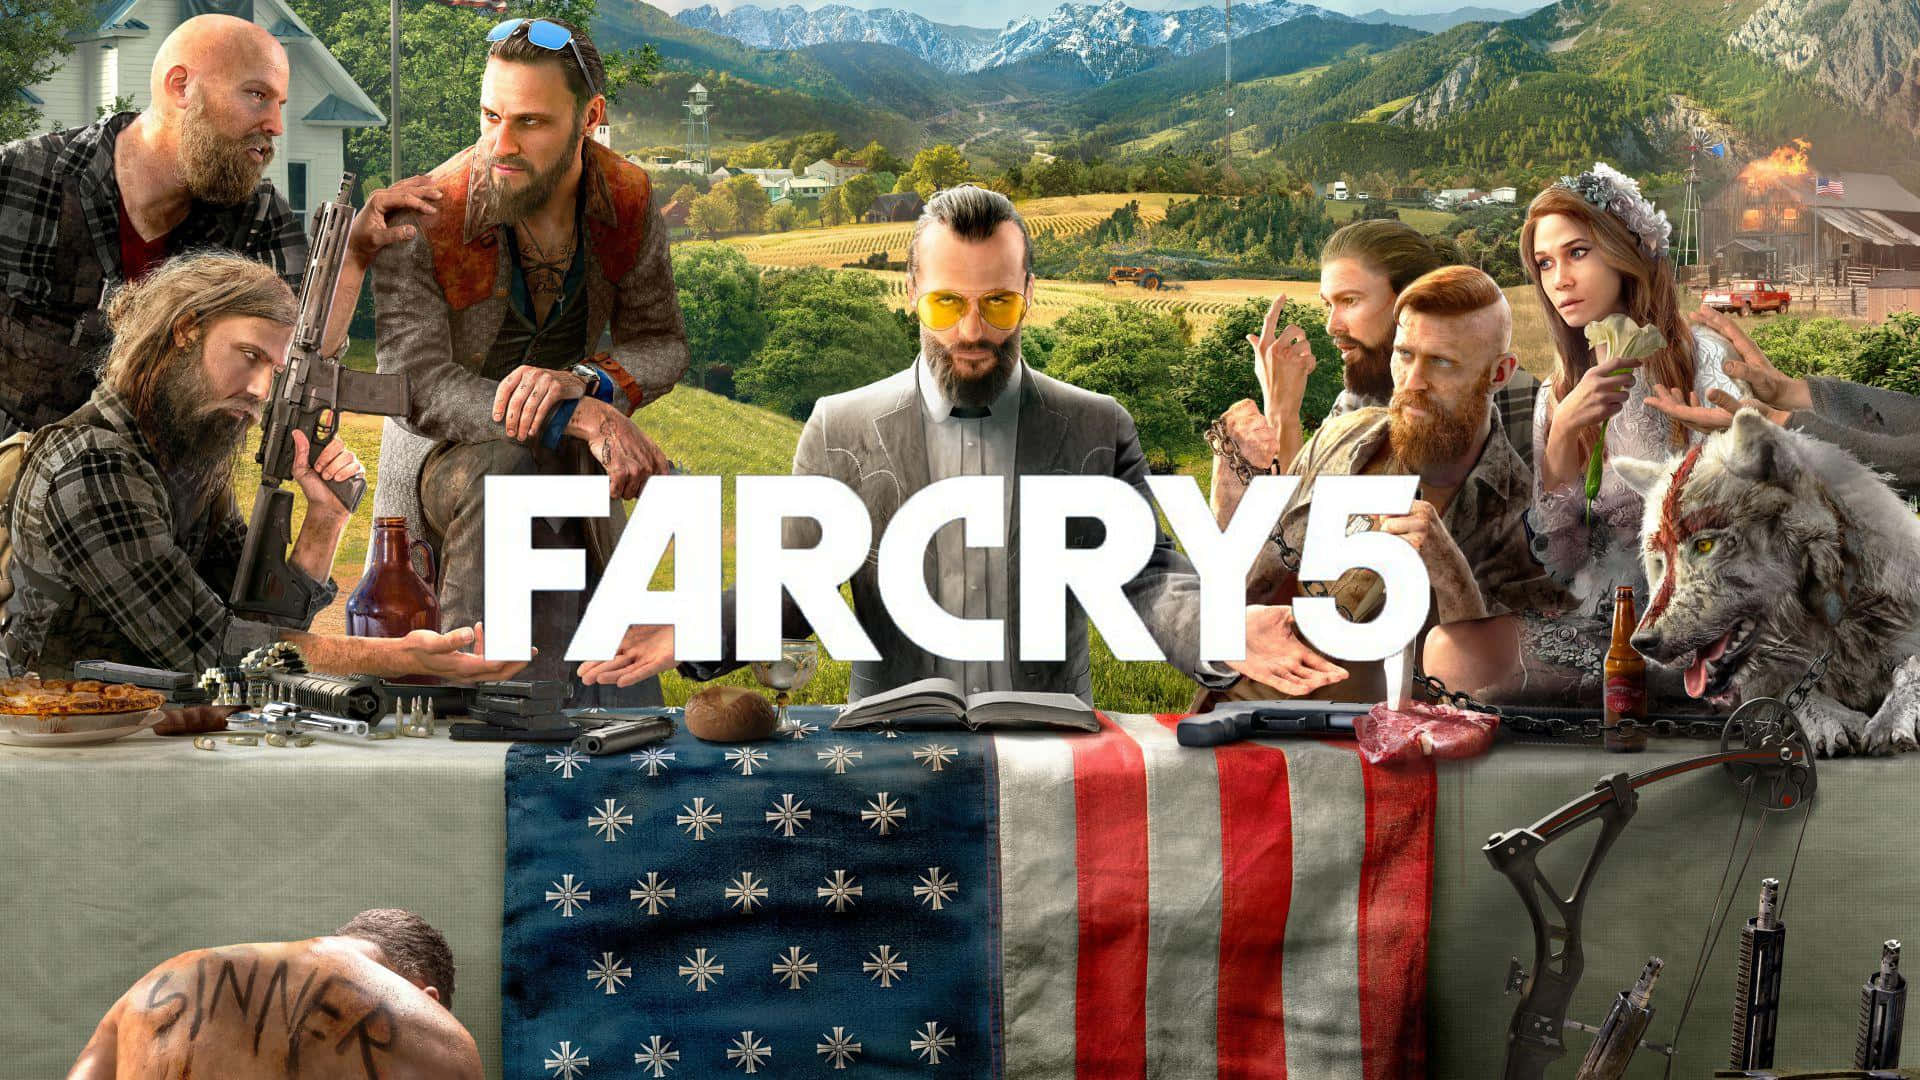 200+] Far Cry 5 Background S | Wallpapers.Com